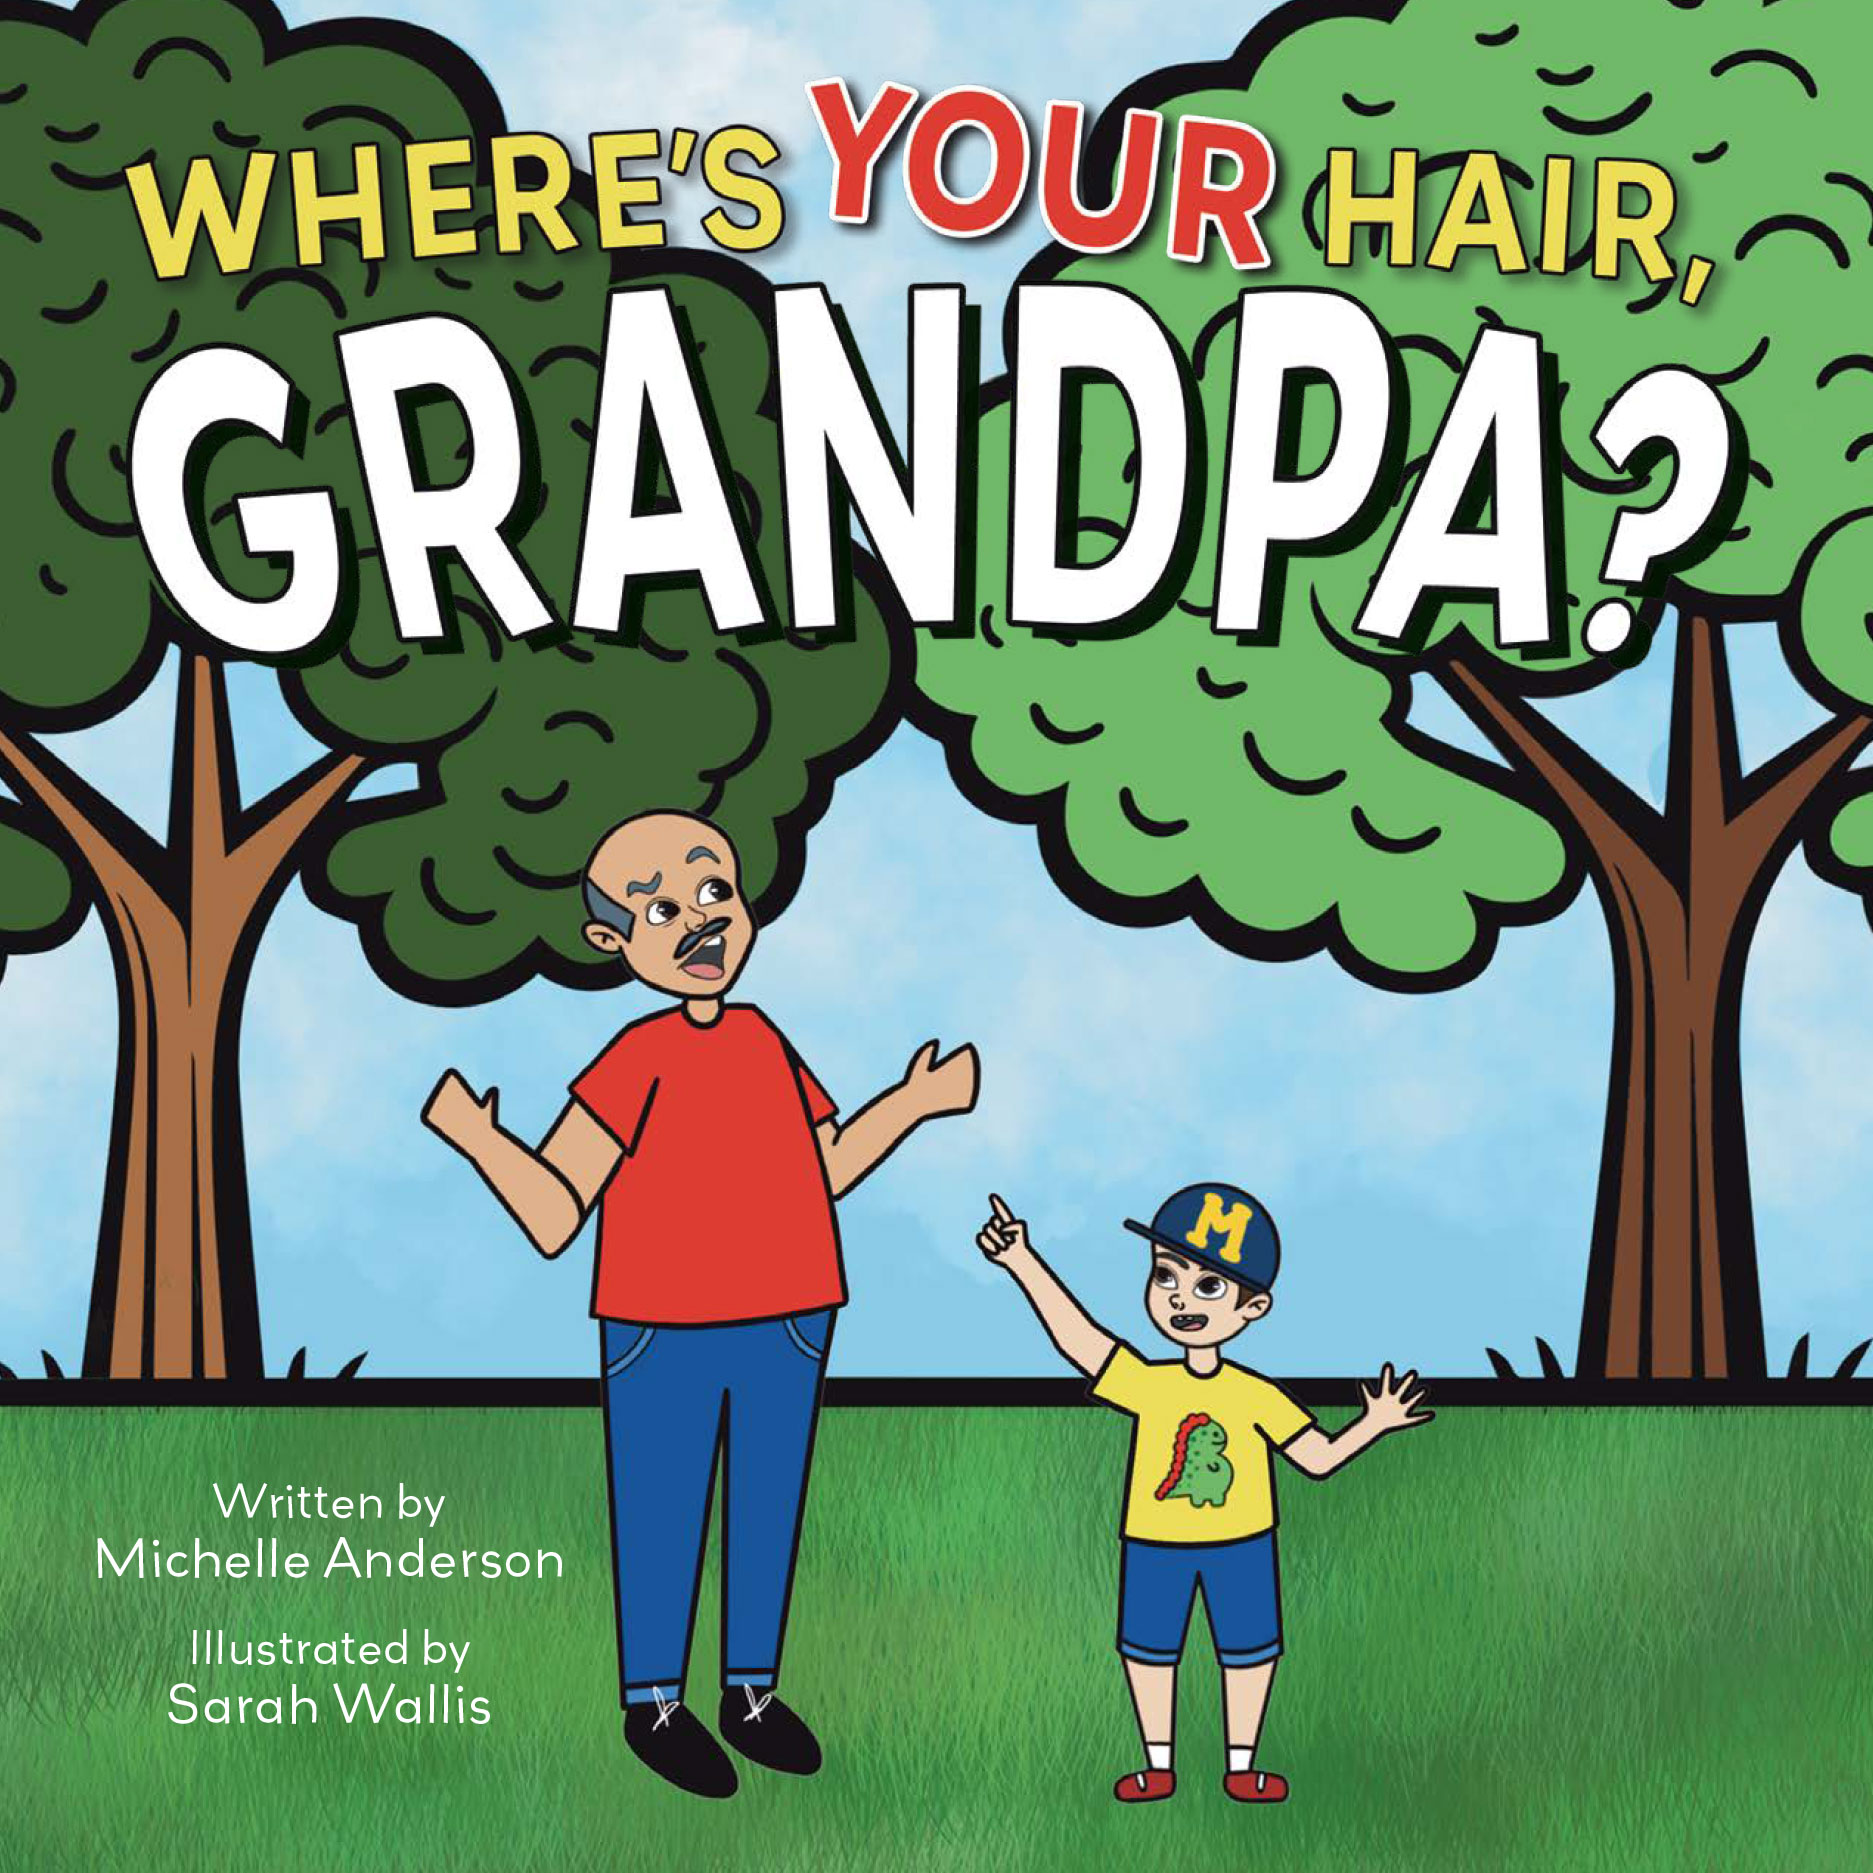 "Where's Your Hair, Grandpa?" by Michelle Anderson book cover